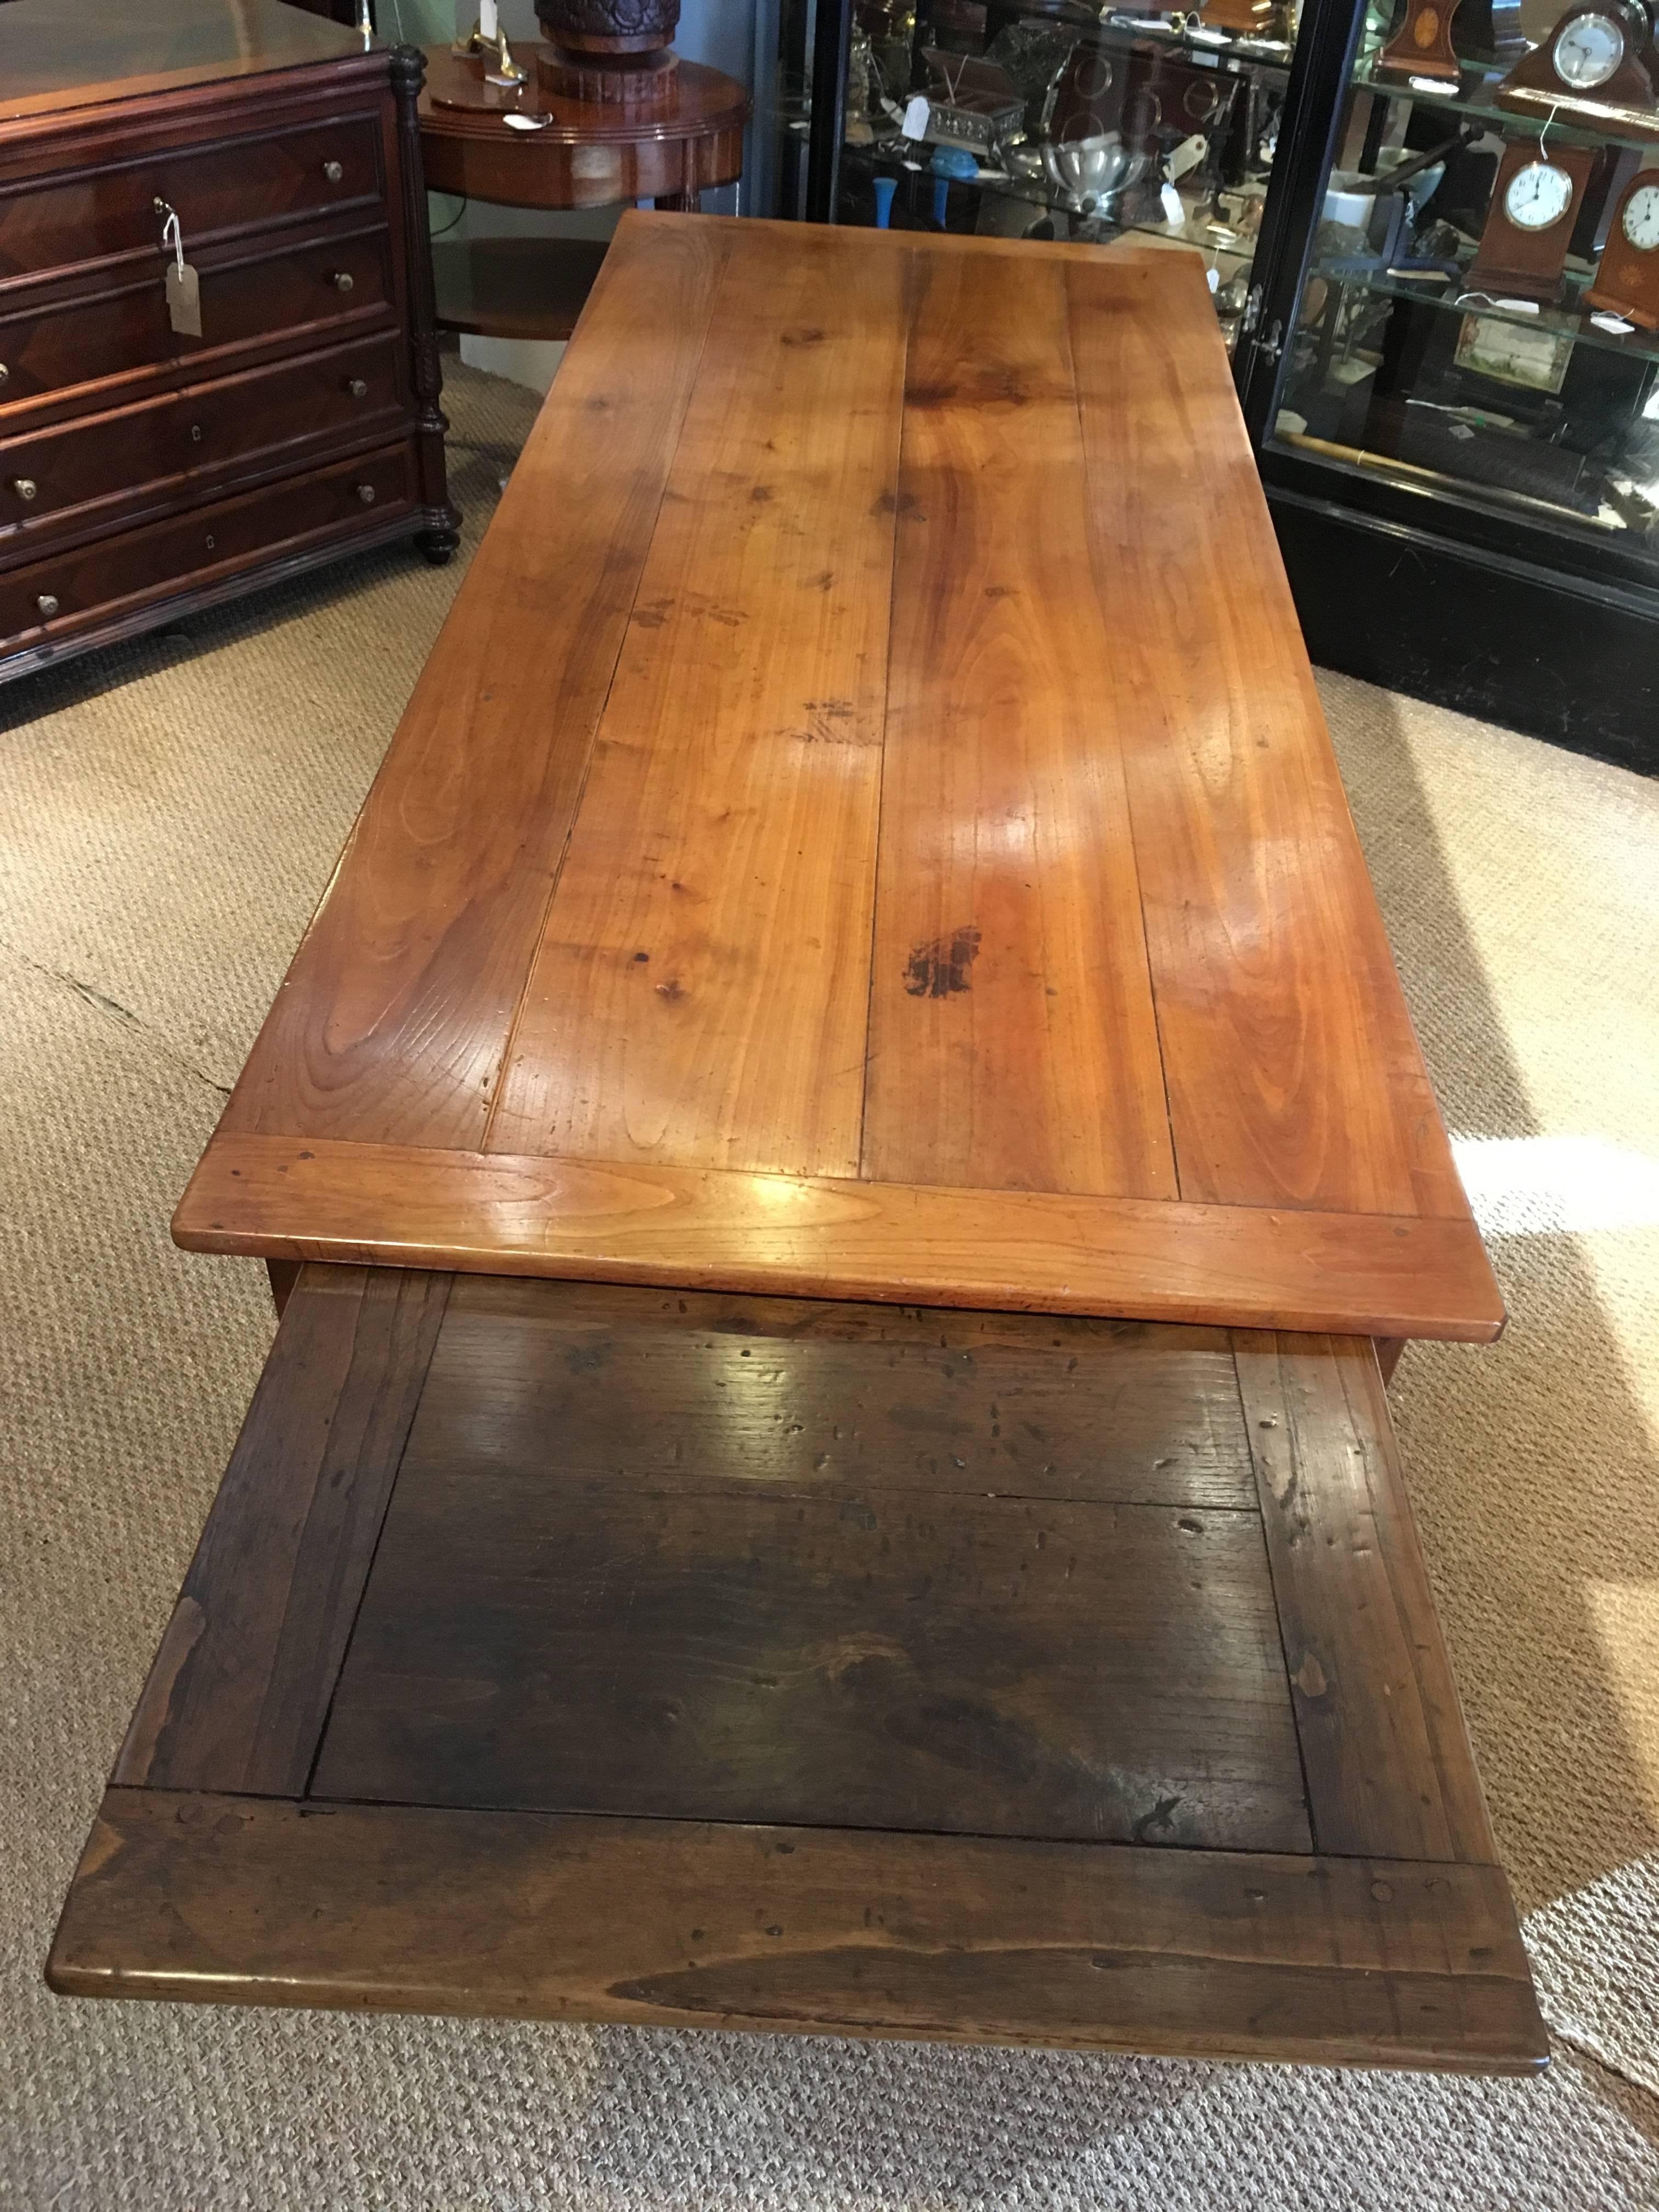 Gorgeous mid-19th century cherrywood farmhouse table 

Dating to around the 1850's having a wonderful original color and patina 

This table has been through our workshops, cleaned/waxed polished, all the joints are firm. Single drawer to one